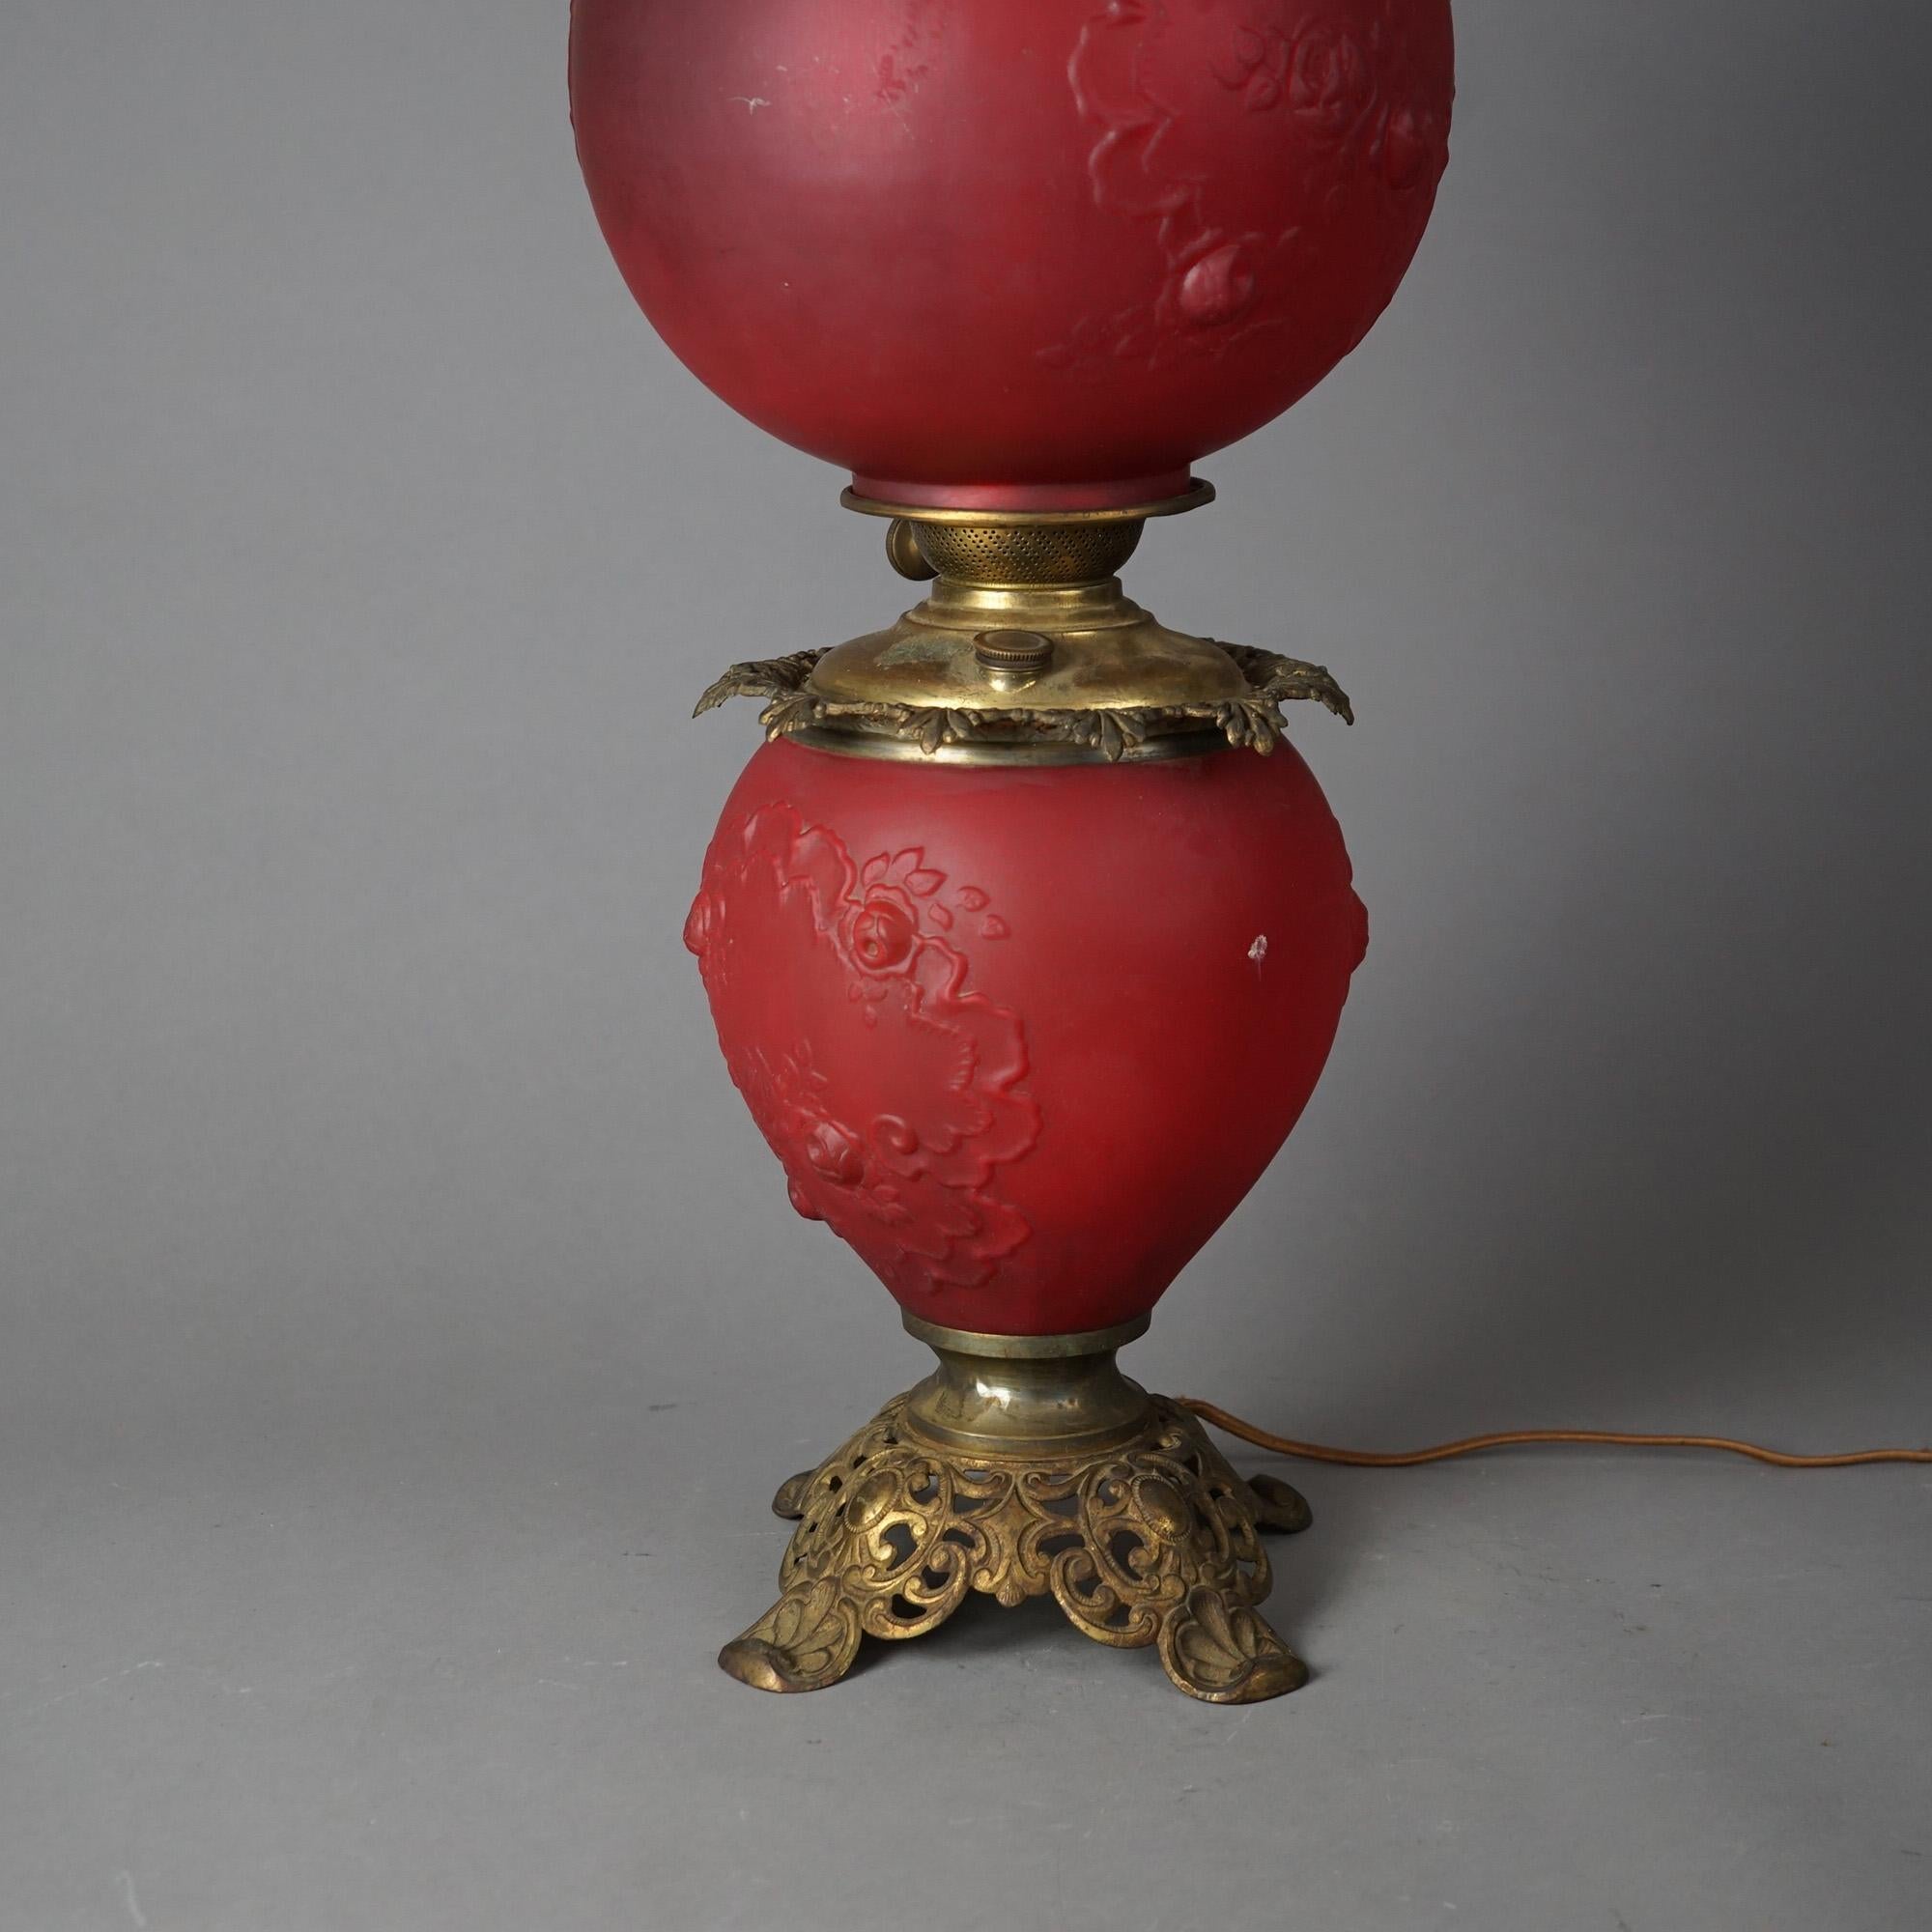 20th Century Antique Brass & Cranberry Glass Gone With The Wind Floral Embossed Lamp c1890 For Sale